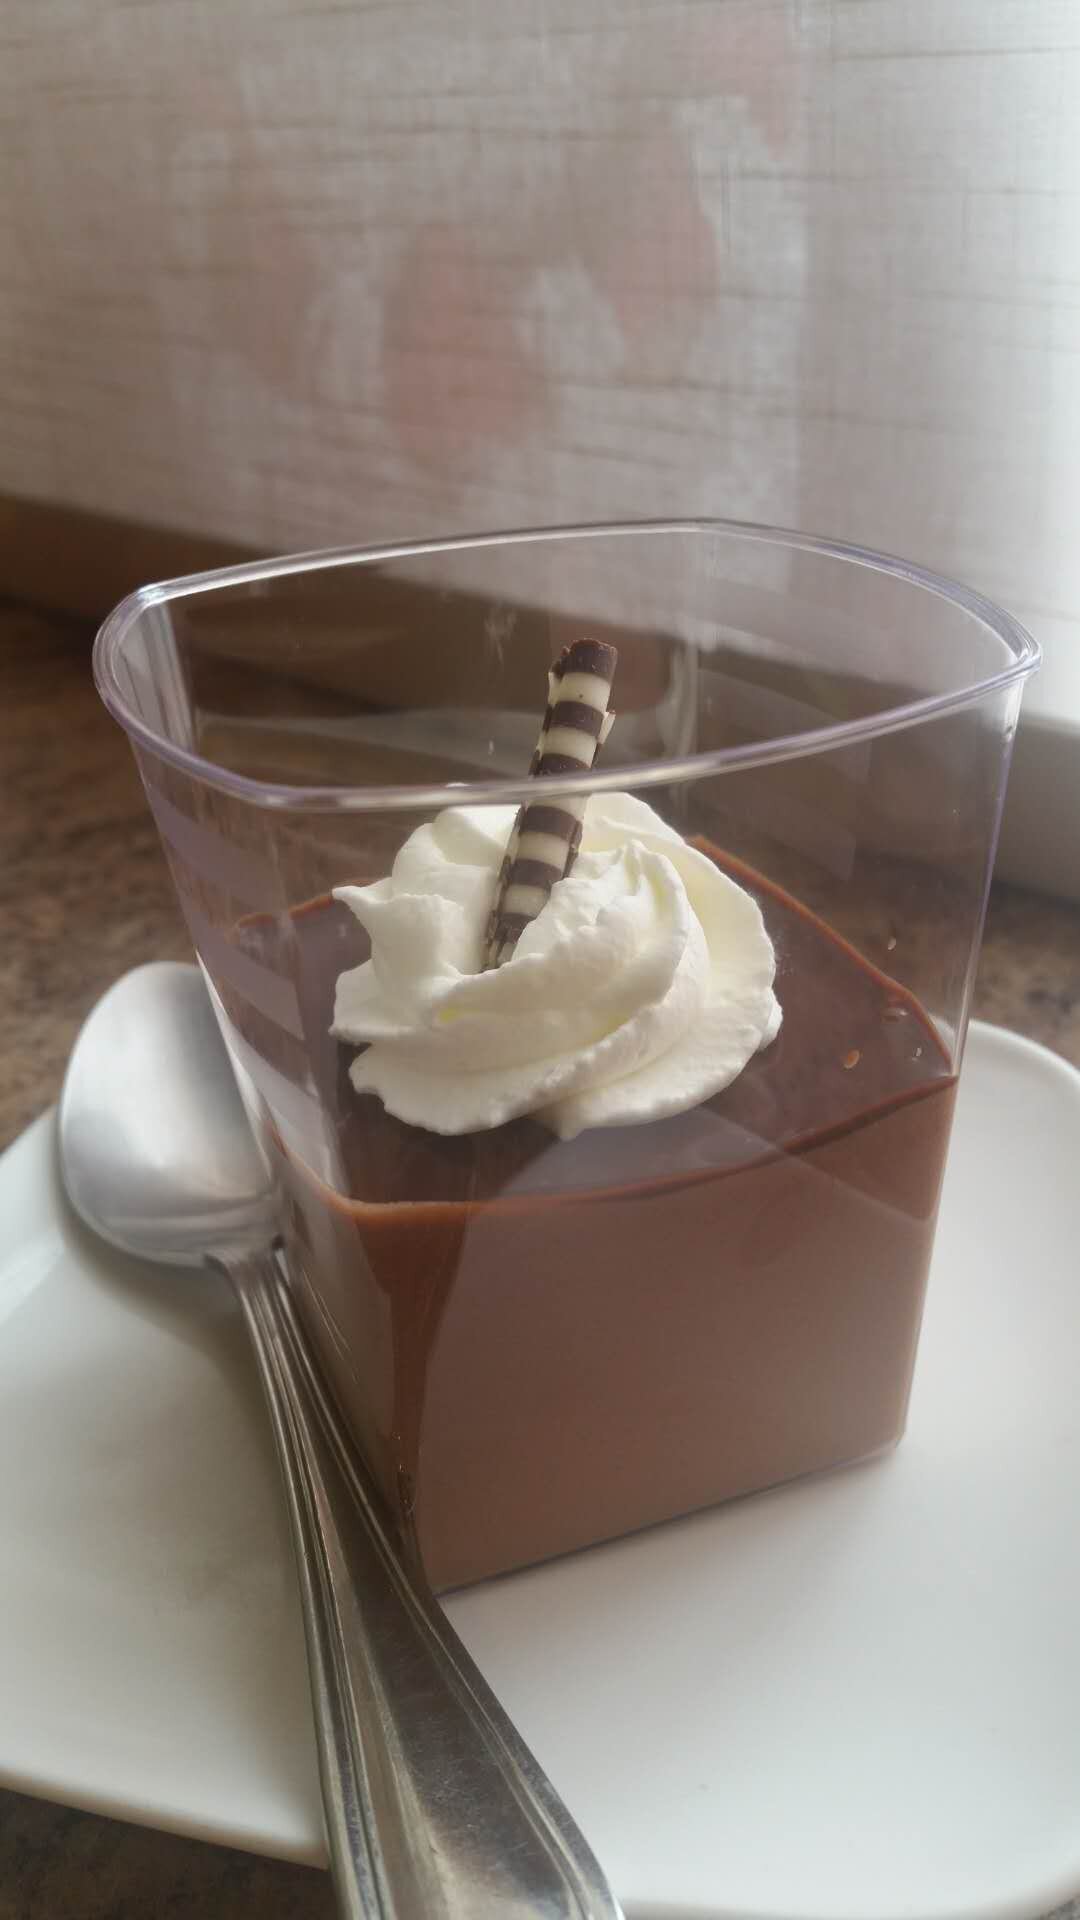 Chocolate Mousse Cup